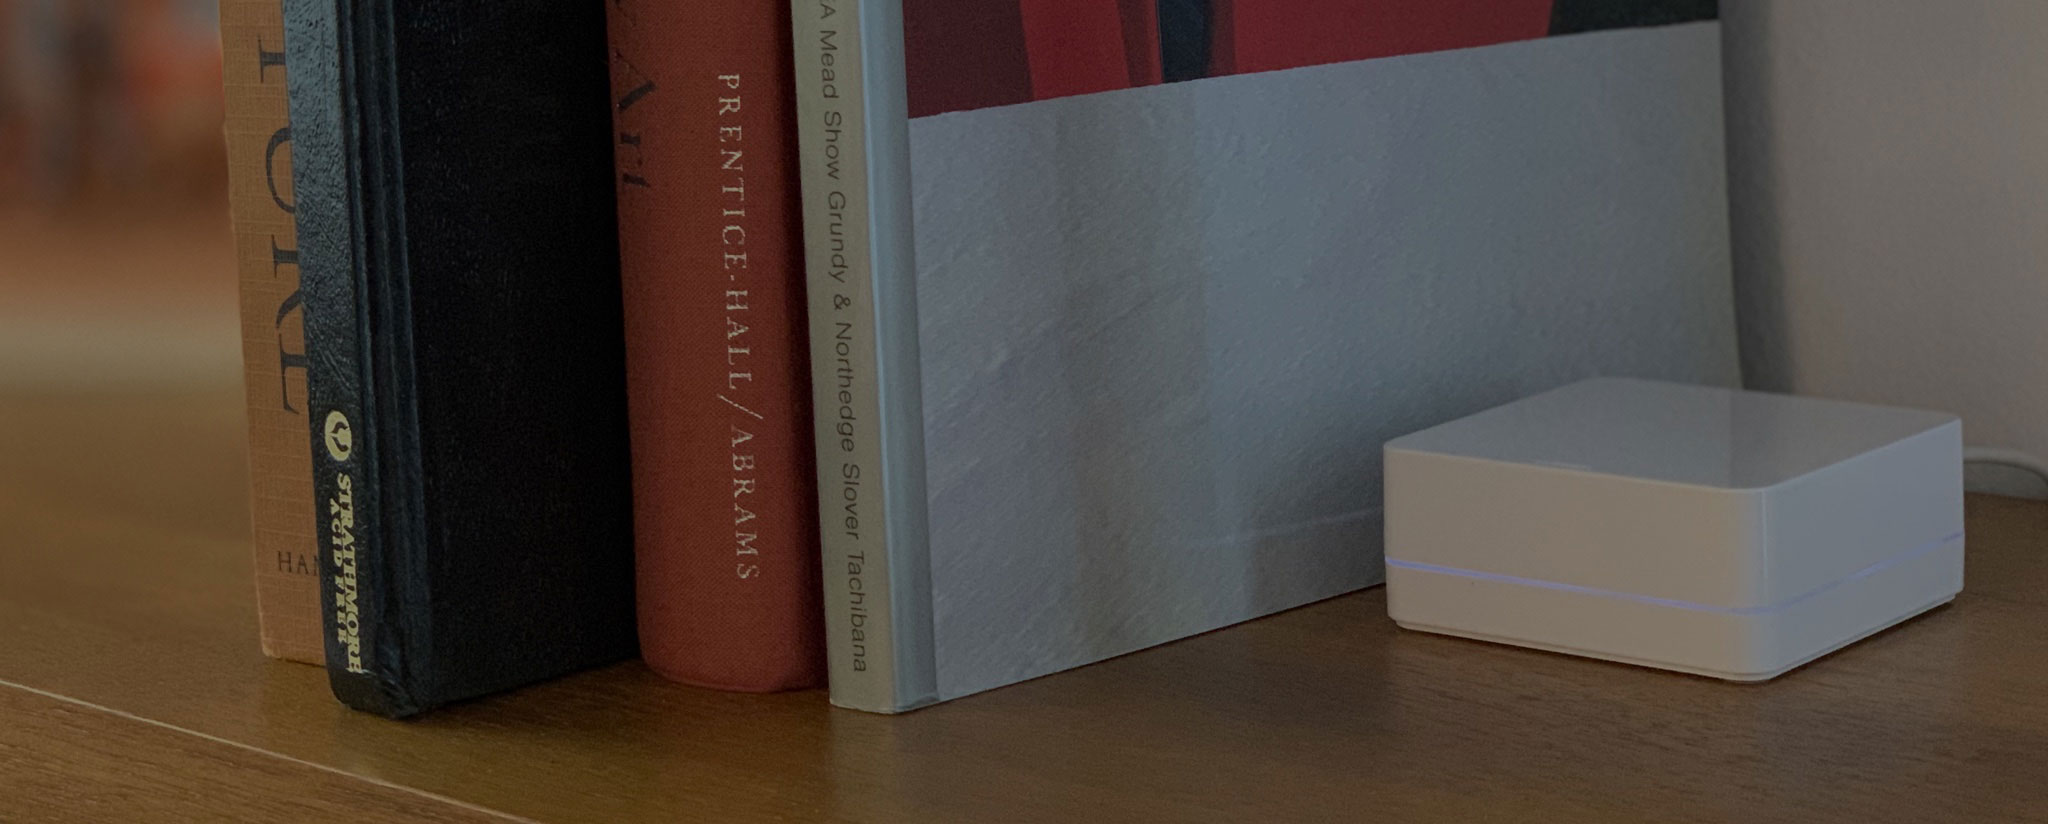 Smart home switch placed next to four books on a shelf